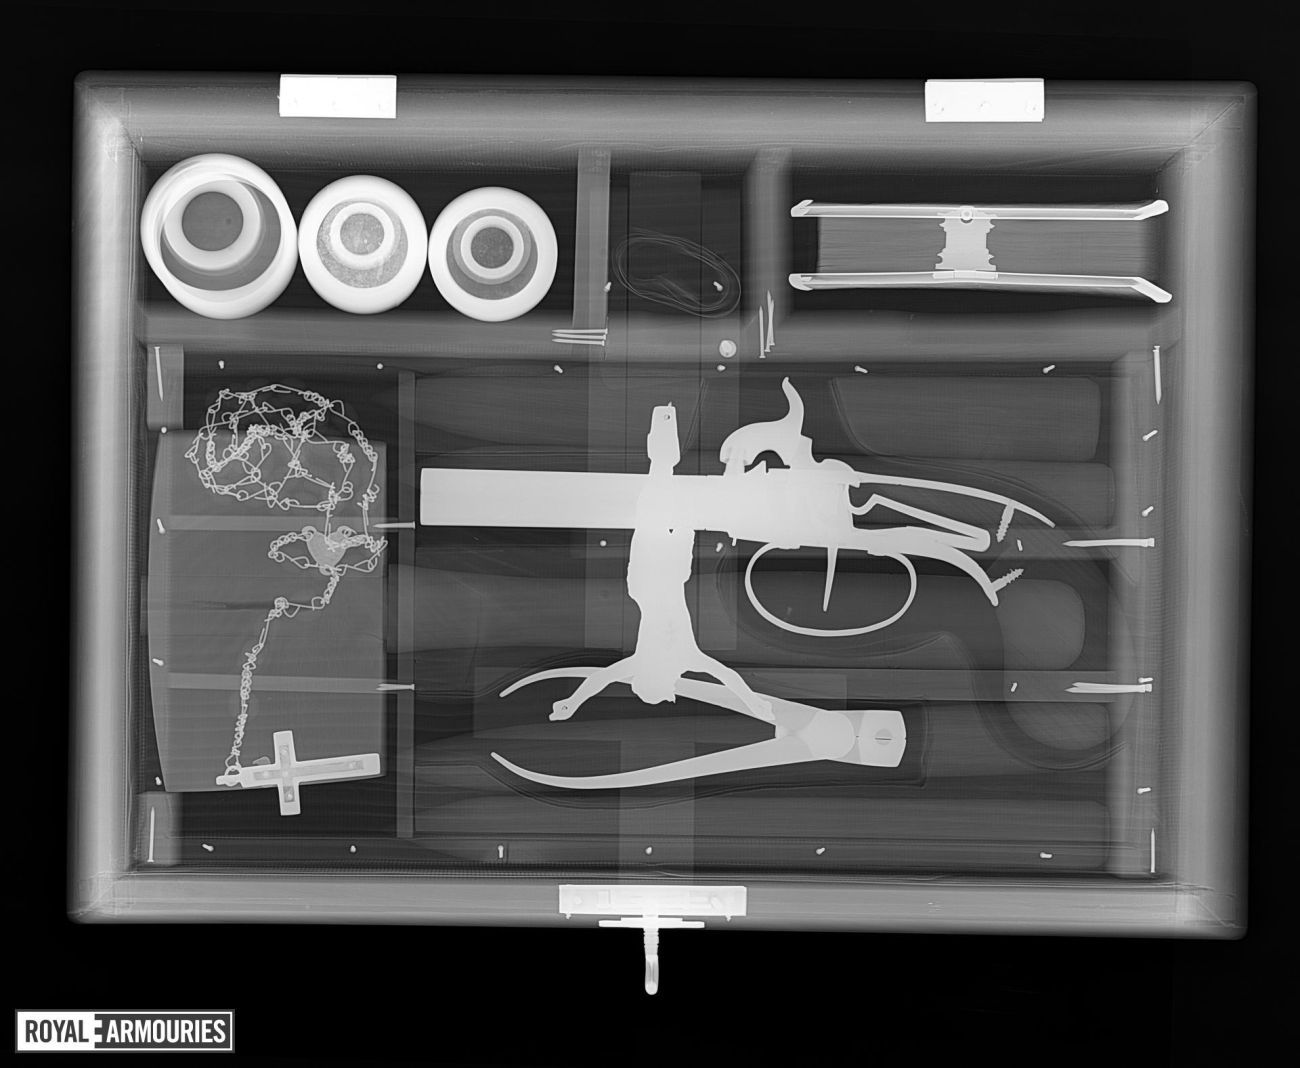 X-Ray scan of the inside contents of the kit